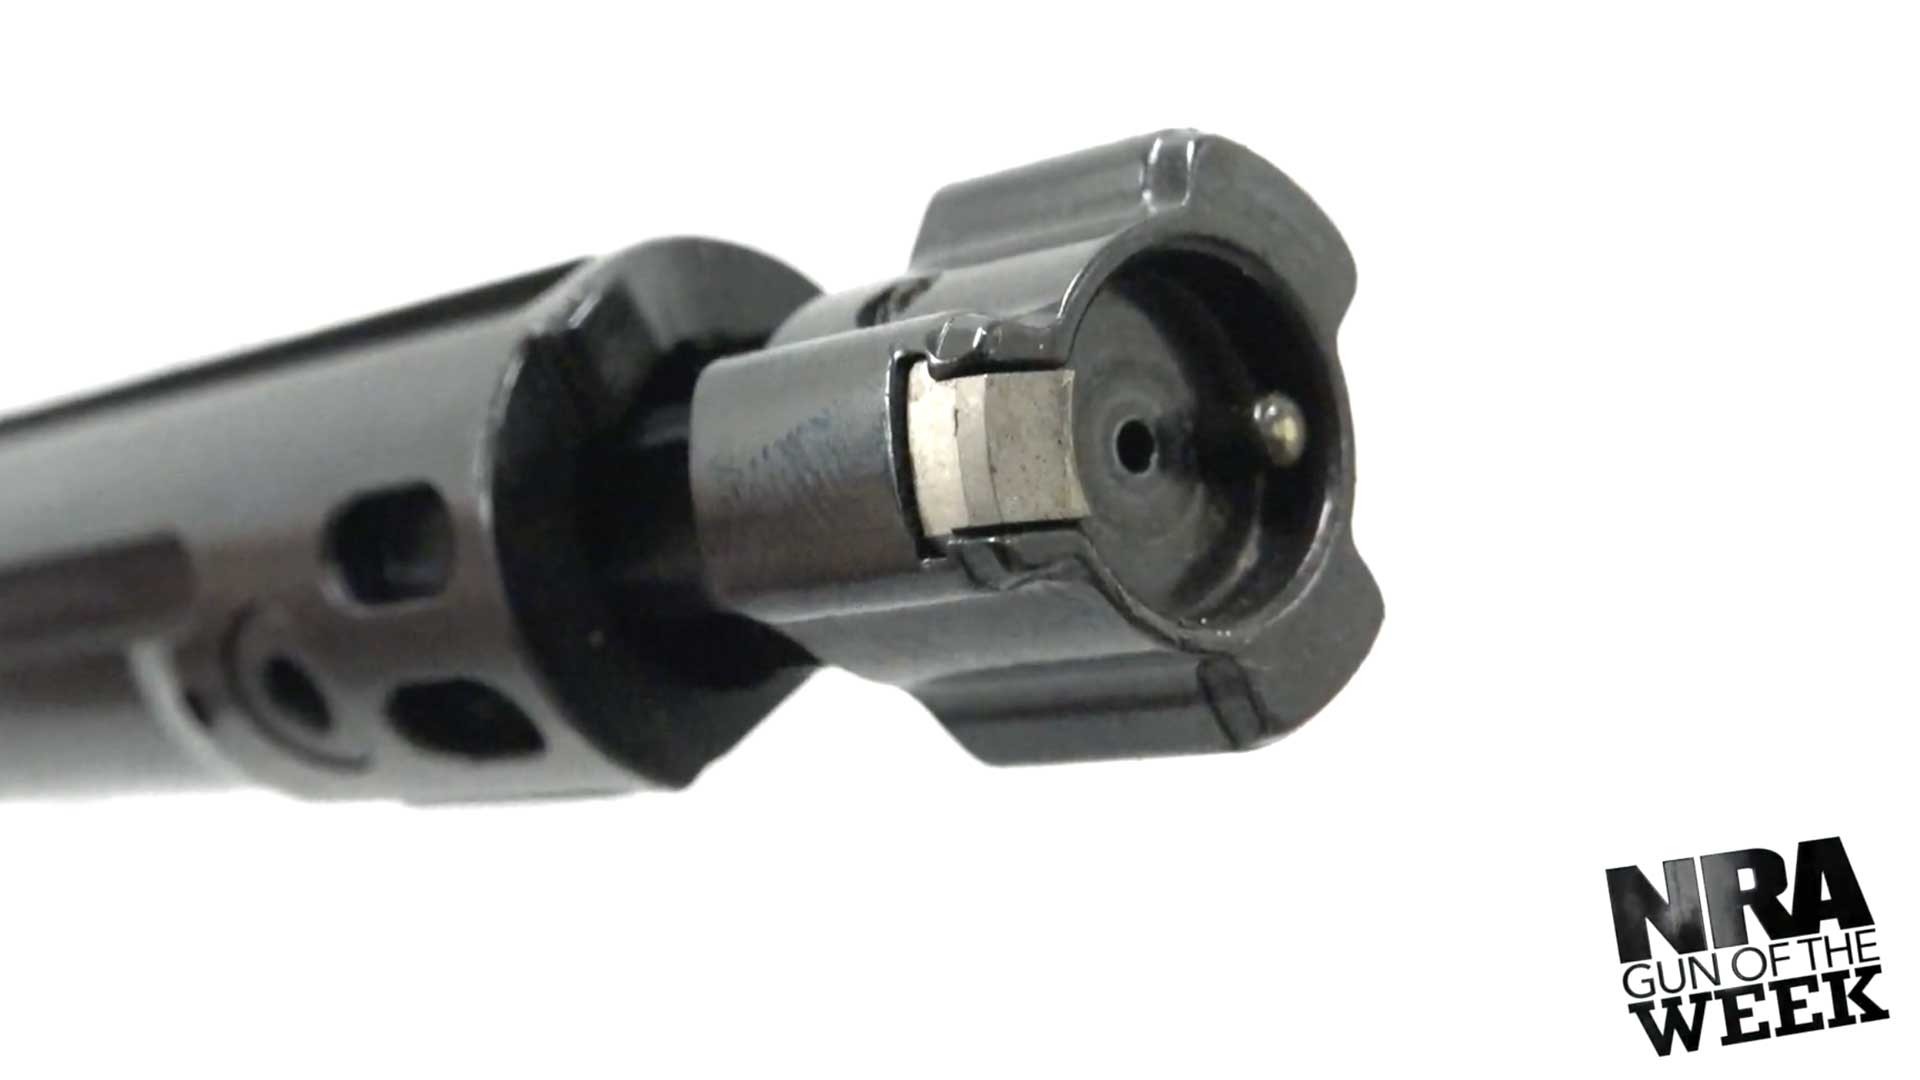 black steel bolt pin cylinder bolt assembly rifle SIG Sauer Cross bolt-action text on image noting "NRA GUN OF THE WEEK"